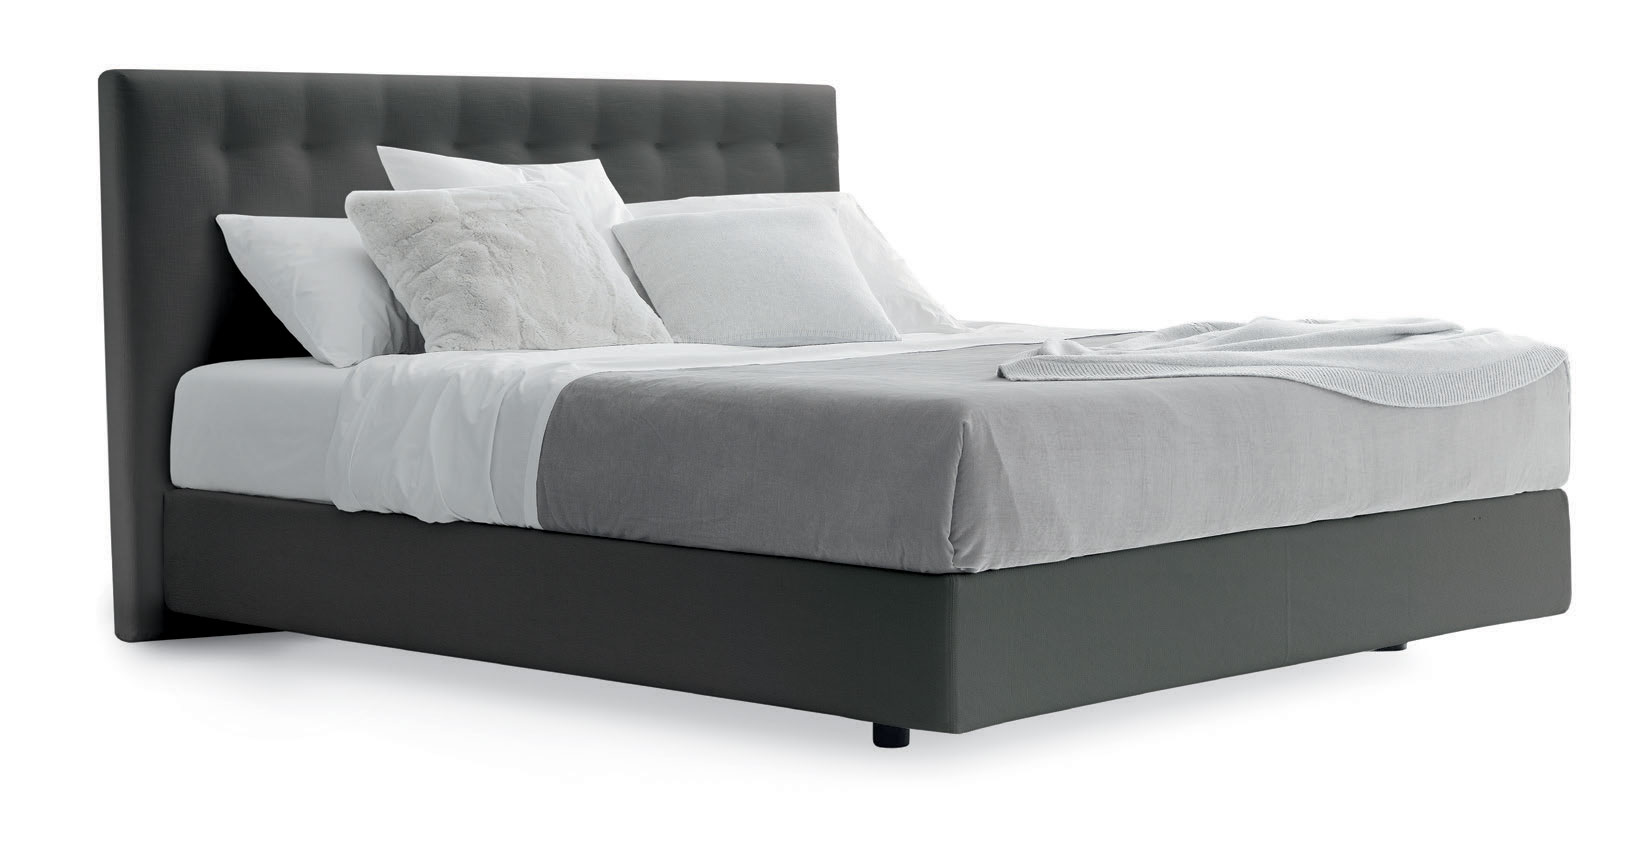 Product Image Arca bed